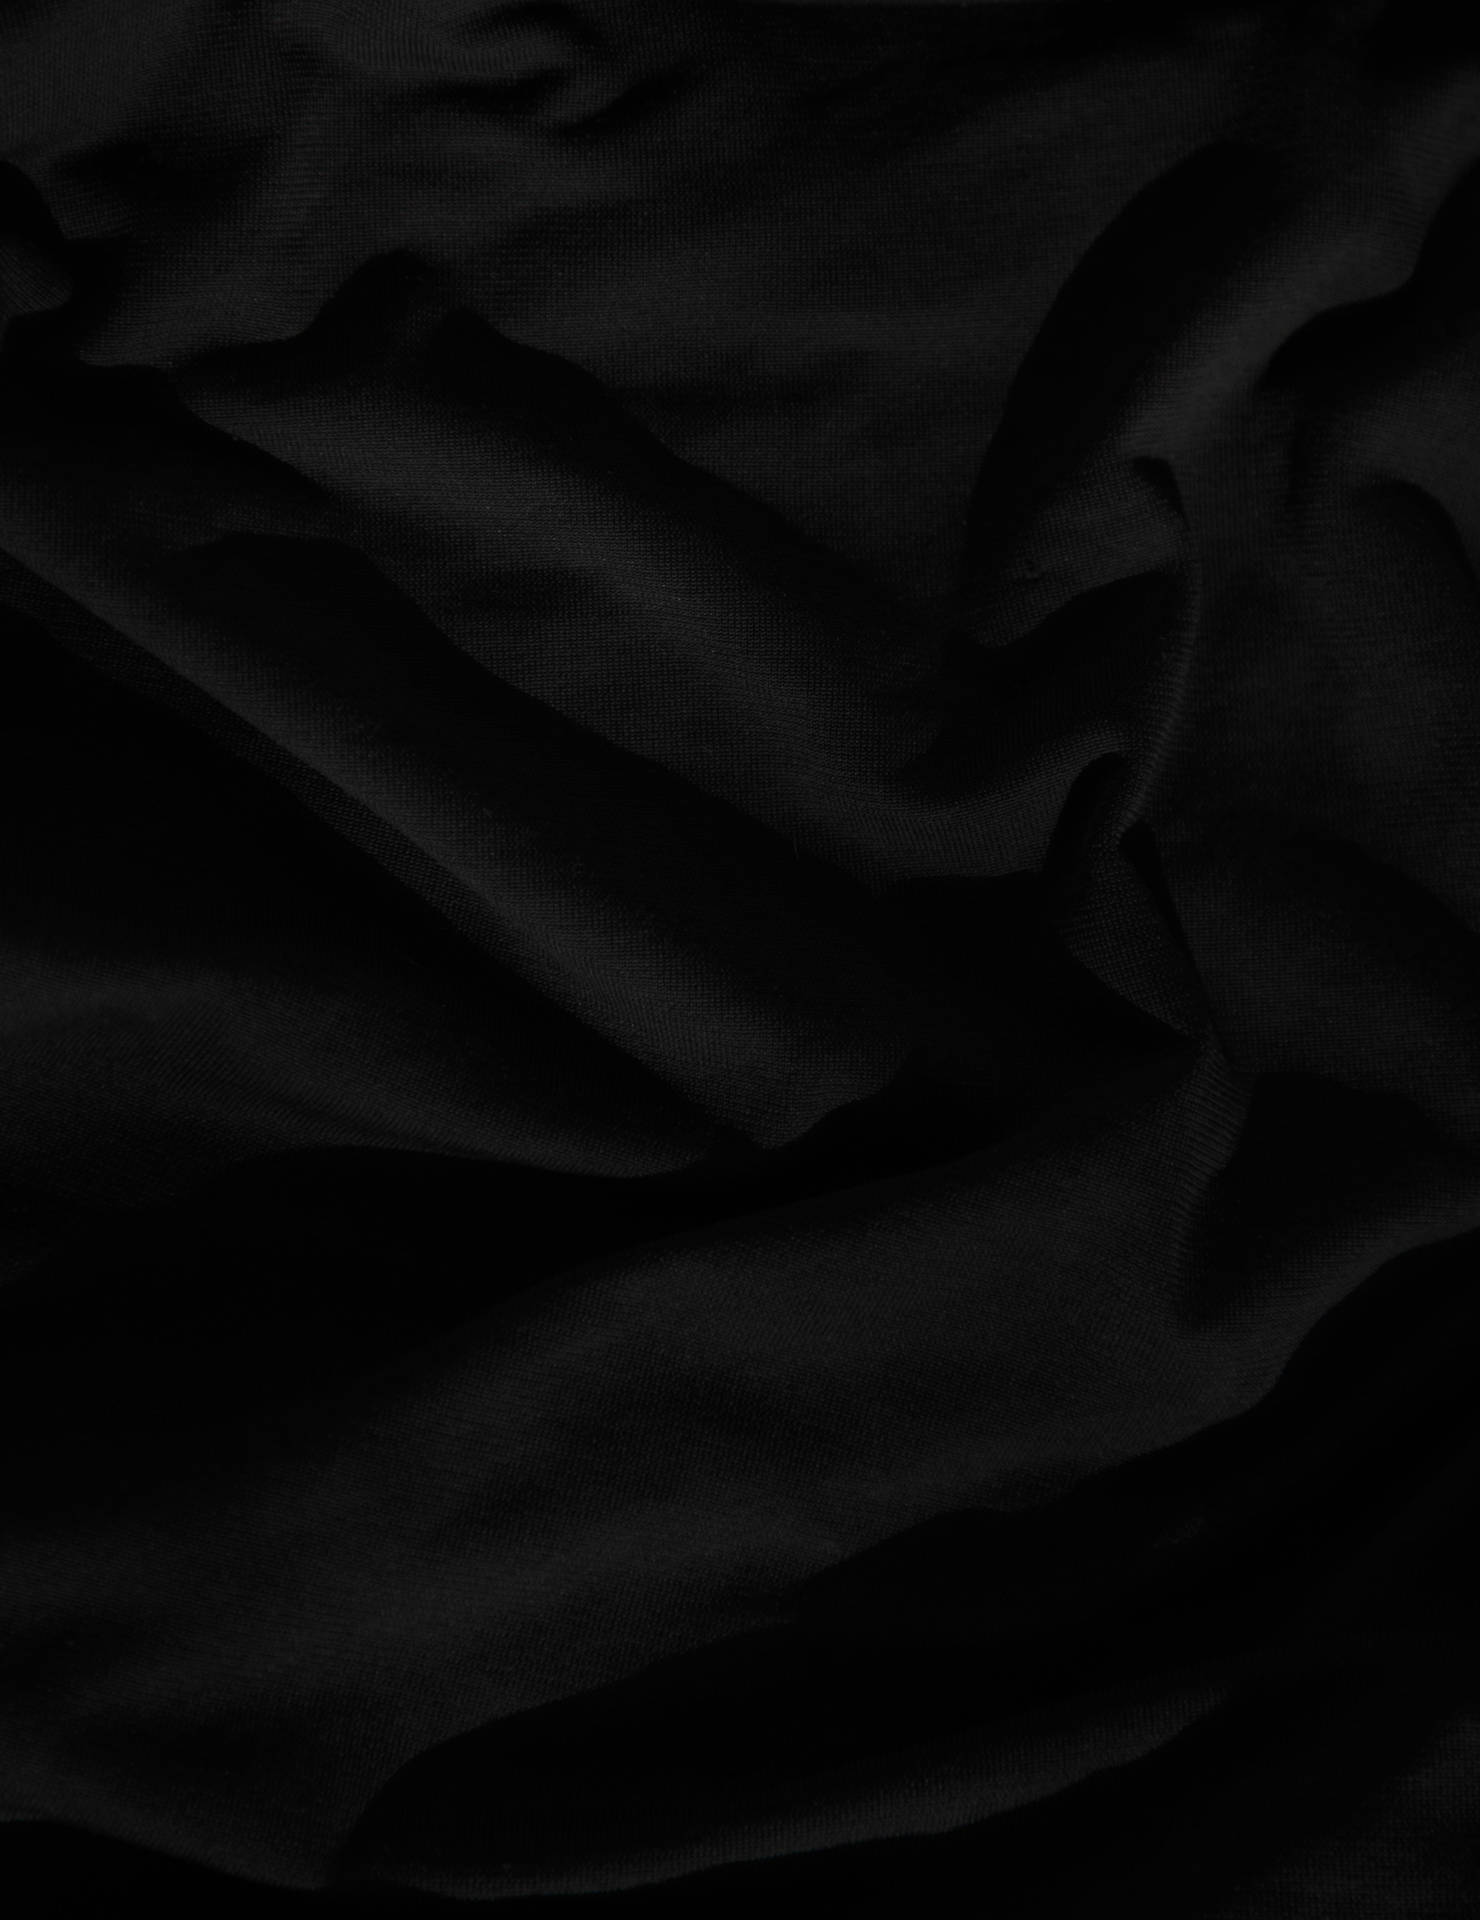 Black Abstract Silk Textile Background